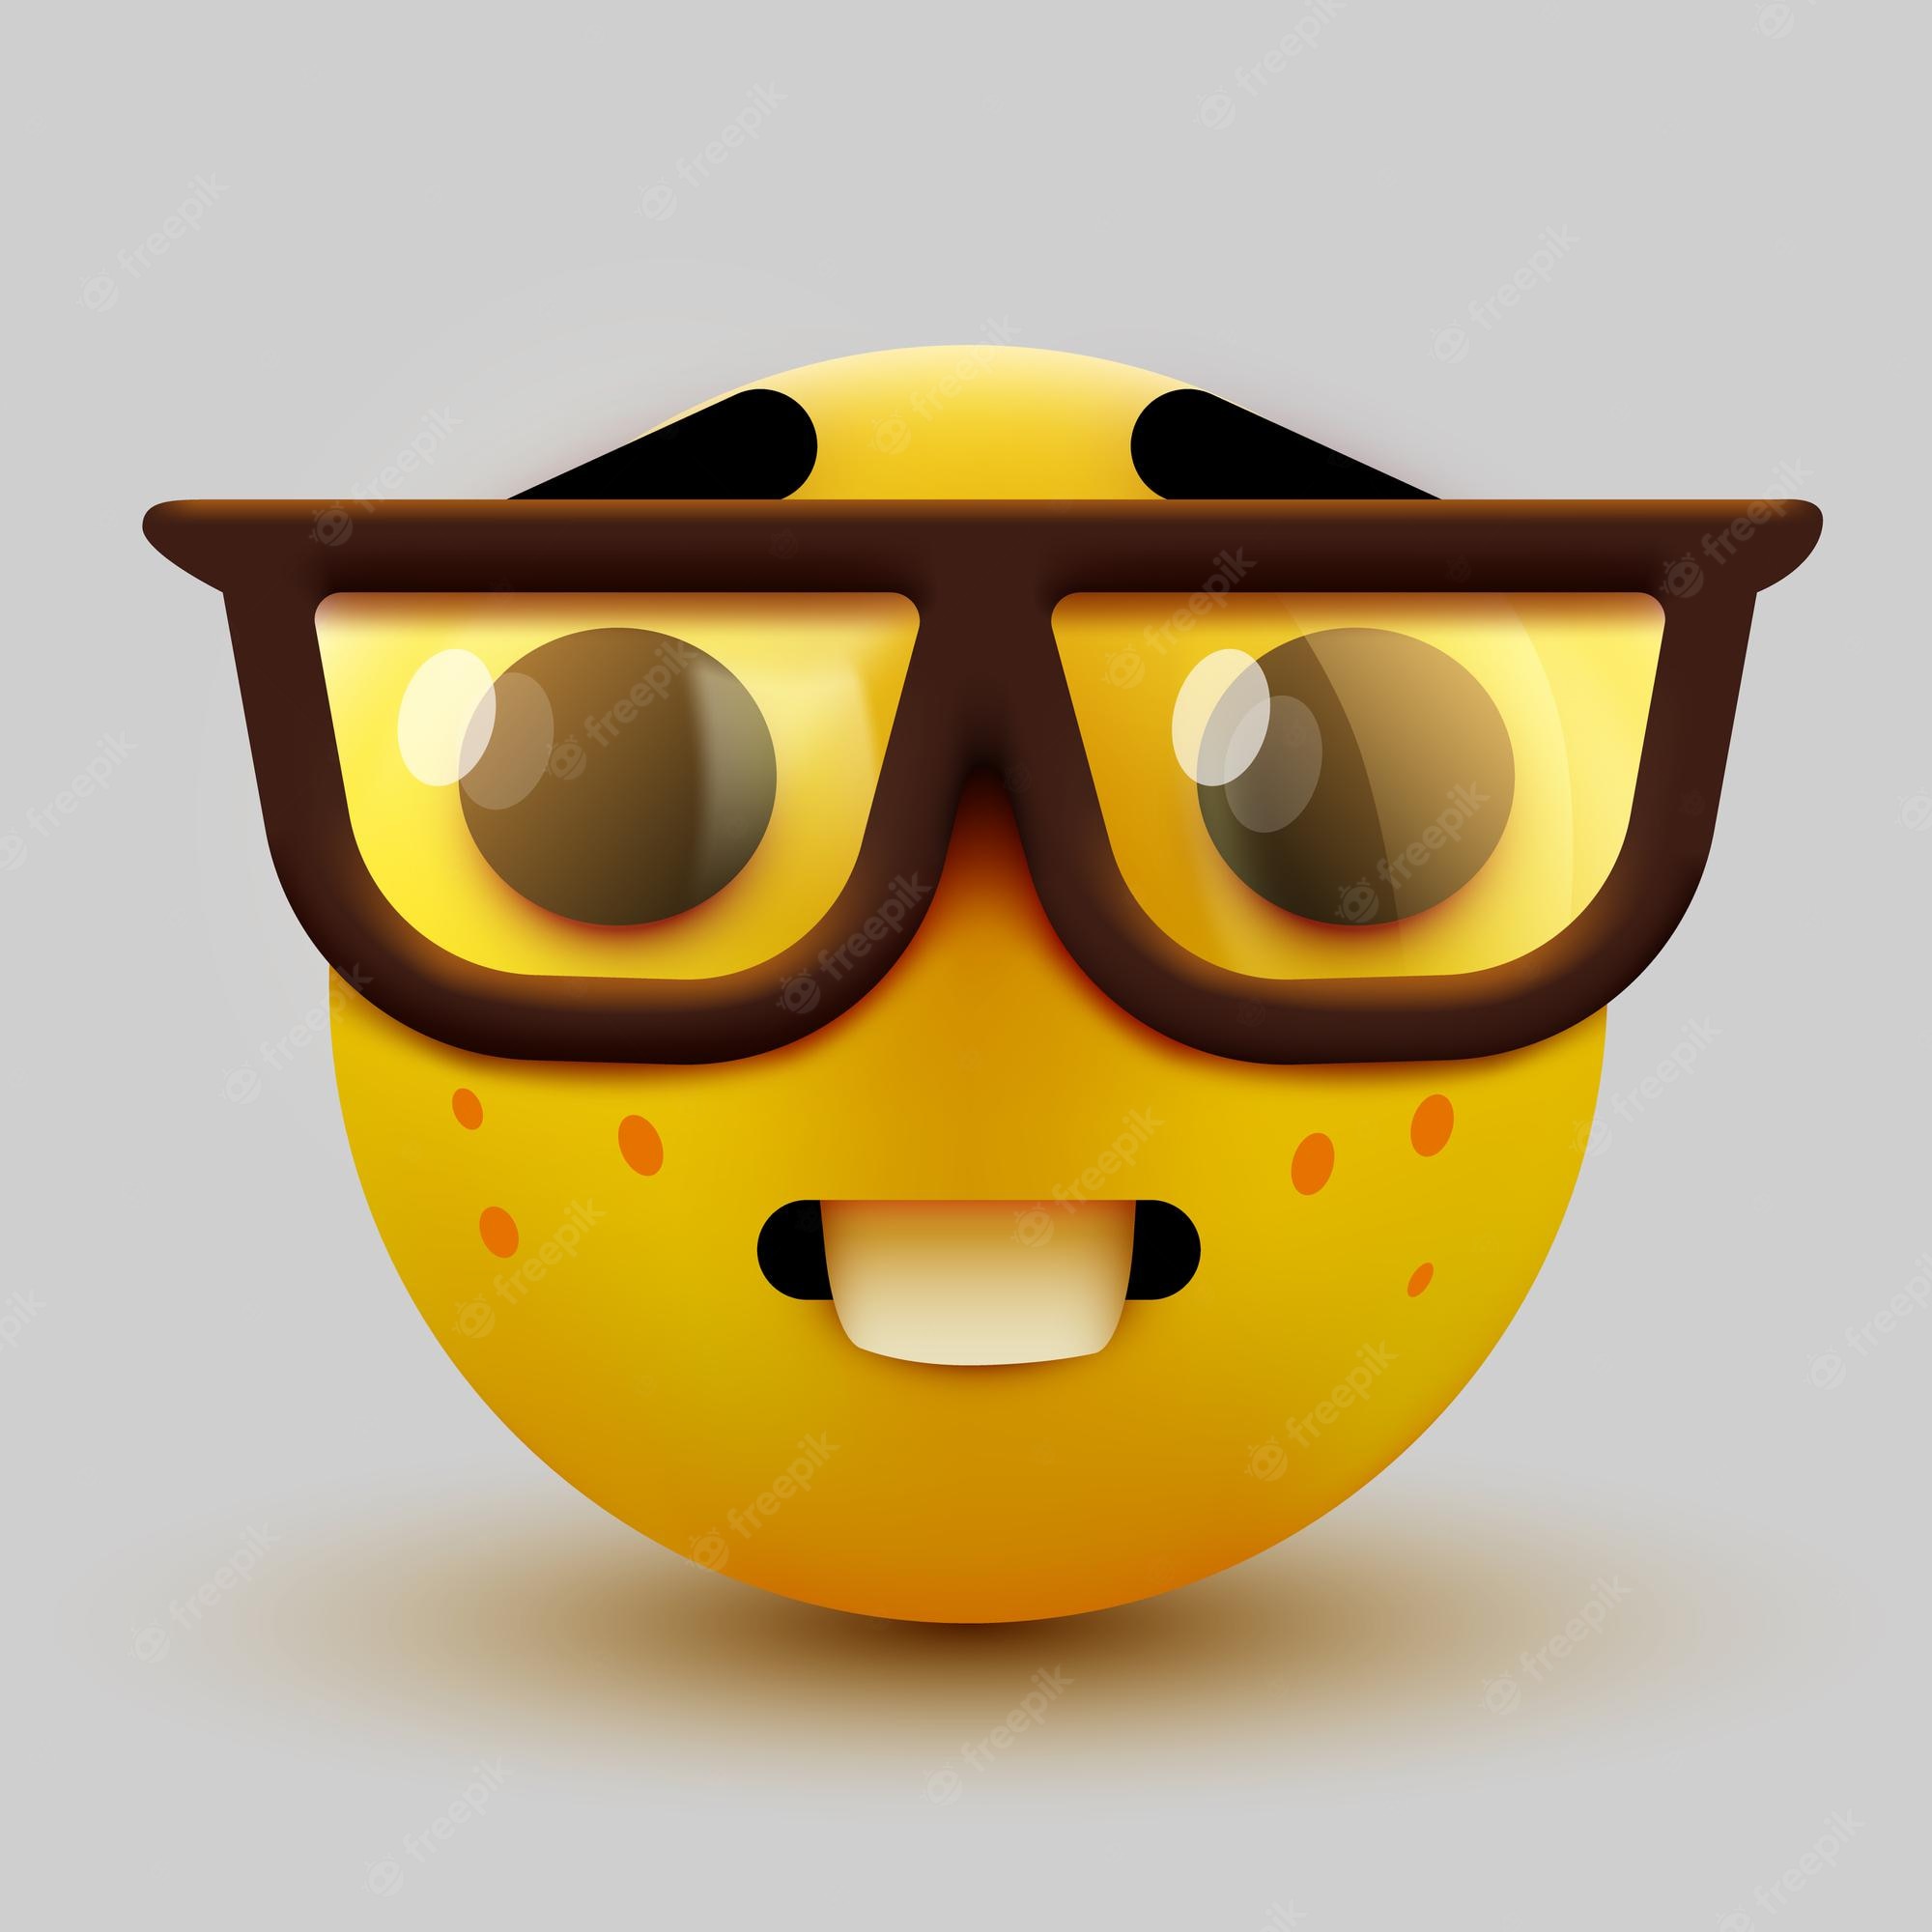 nerd-face-emoji-clever-emoticon-with-glasses-geek-student_3482-1193.jpg